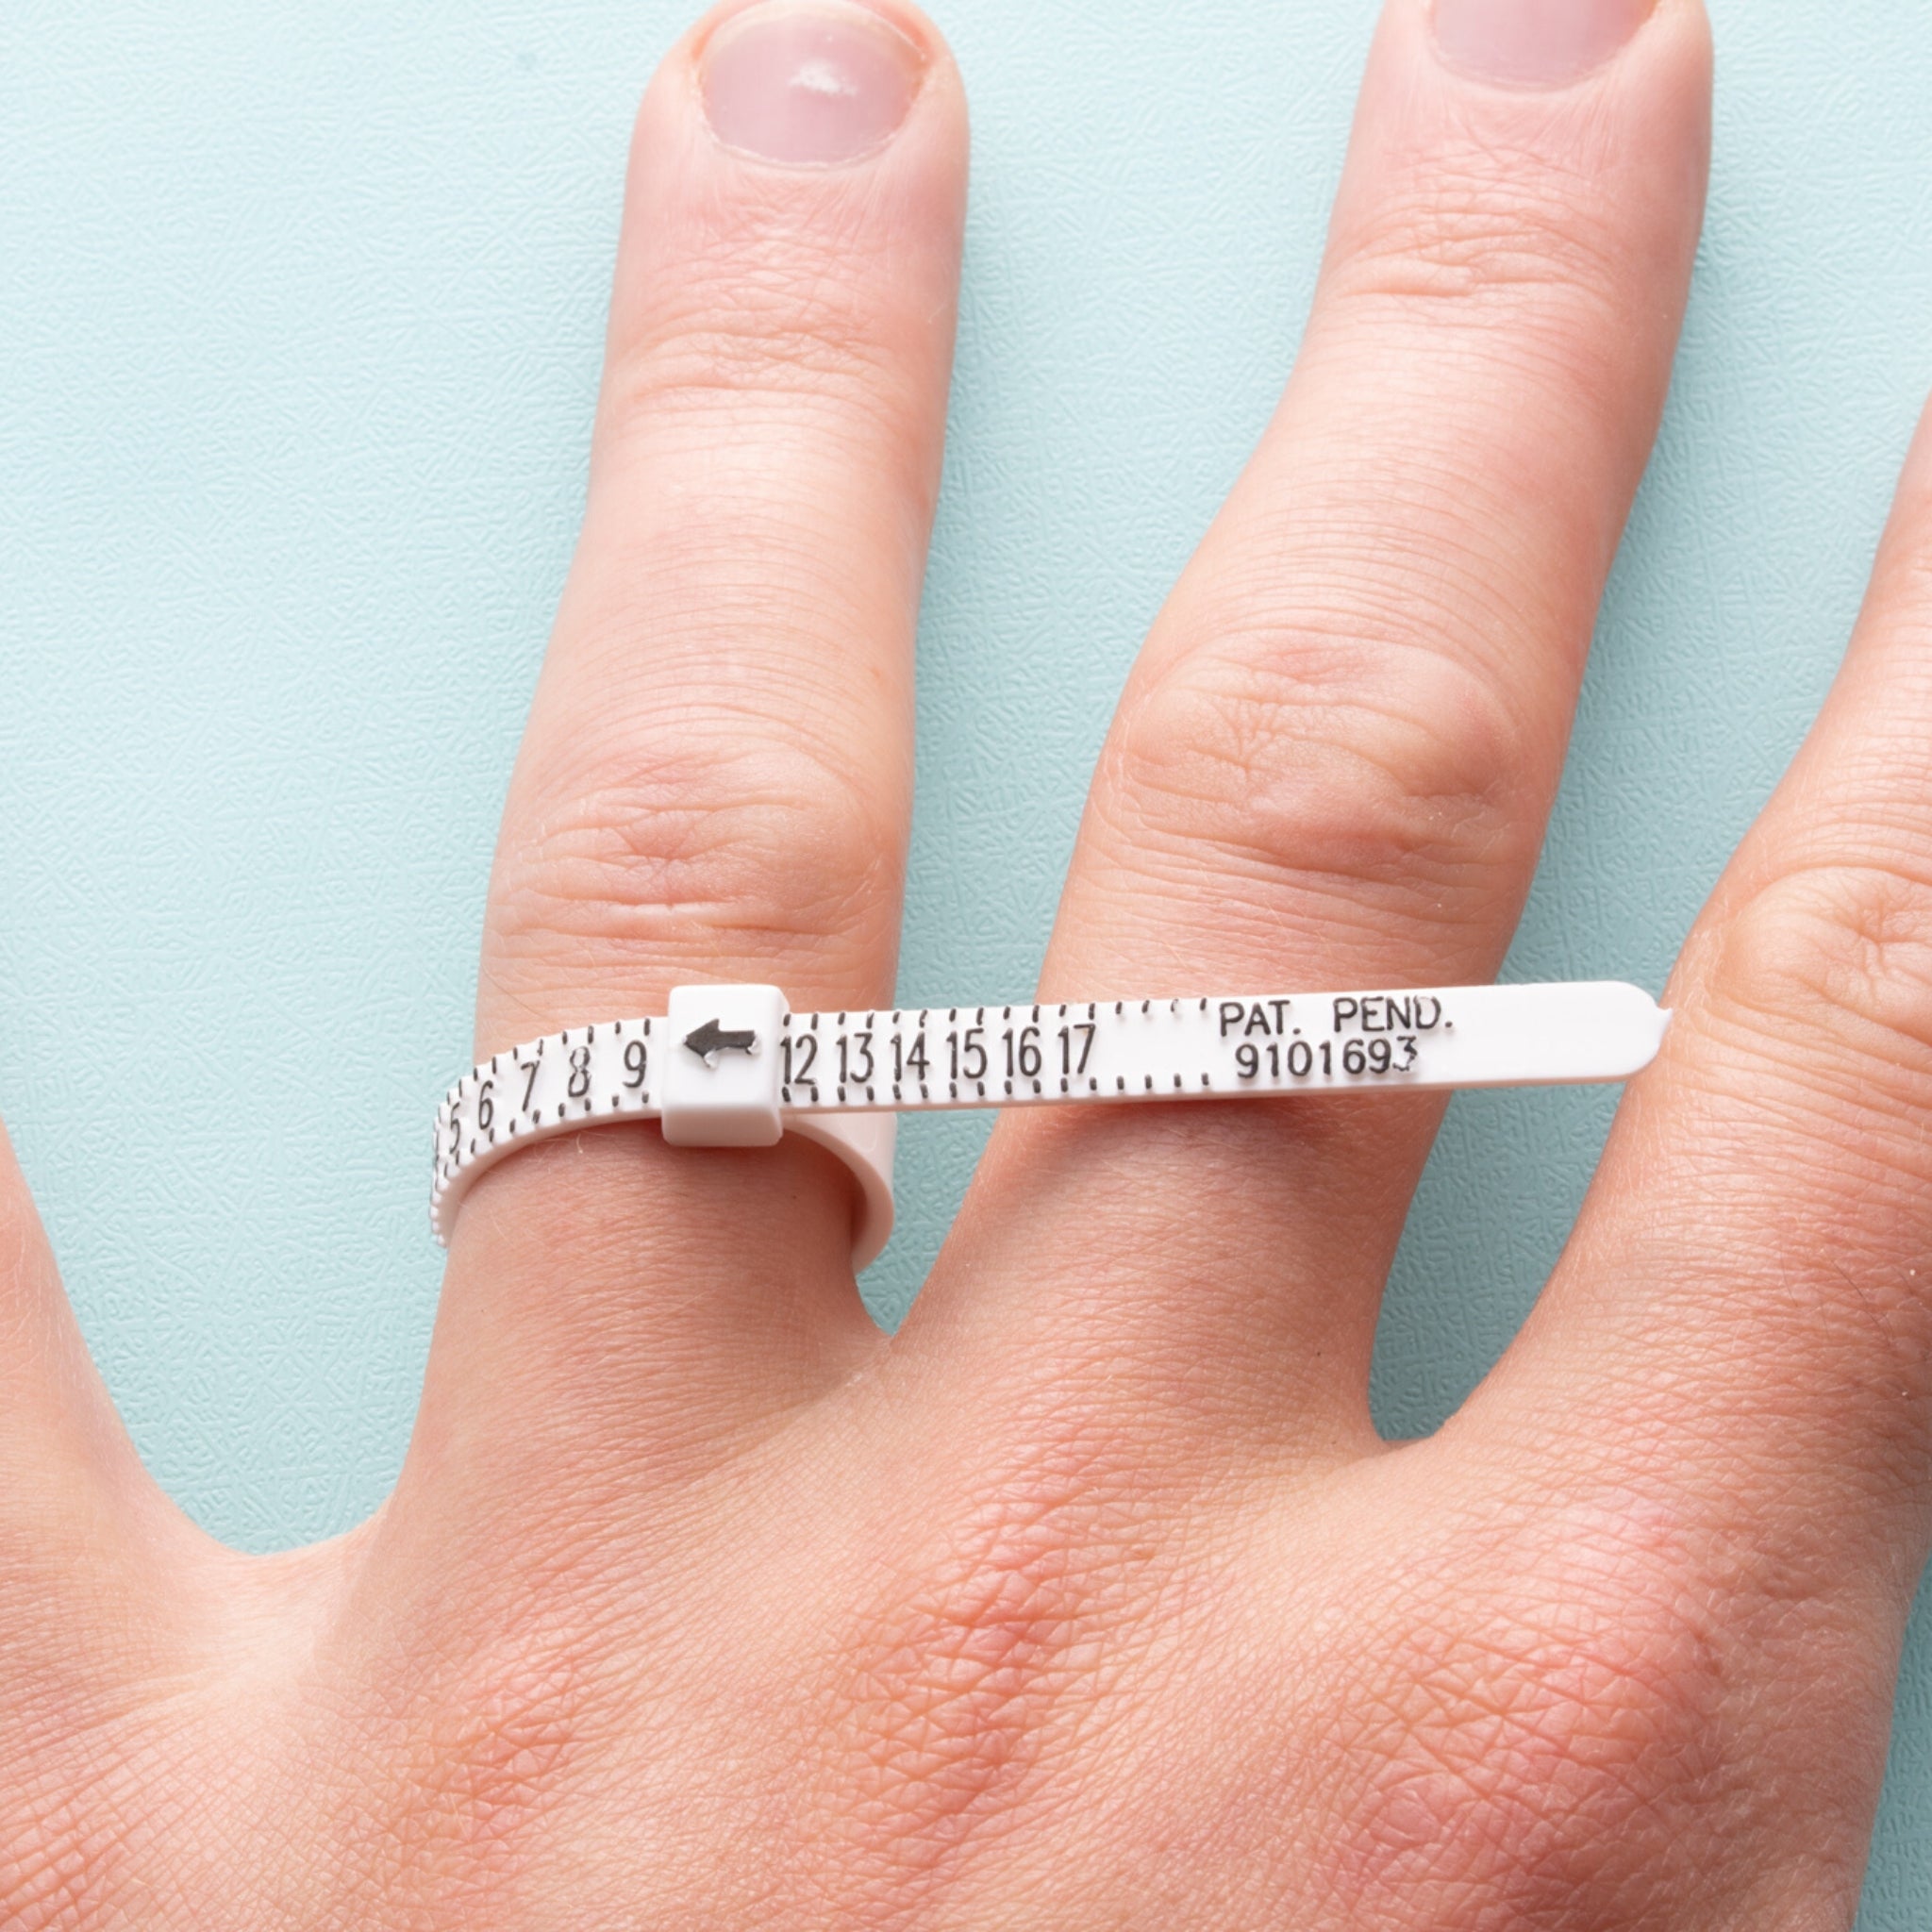 Multisizer Ring Sizing Gague for Accurate Finger Size Measurement BEFORE  You Order Your Ring. 